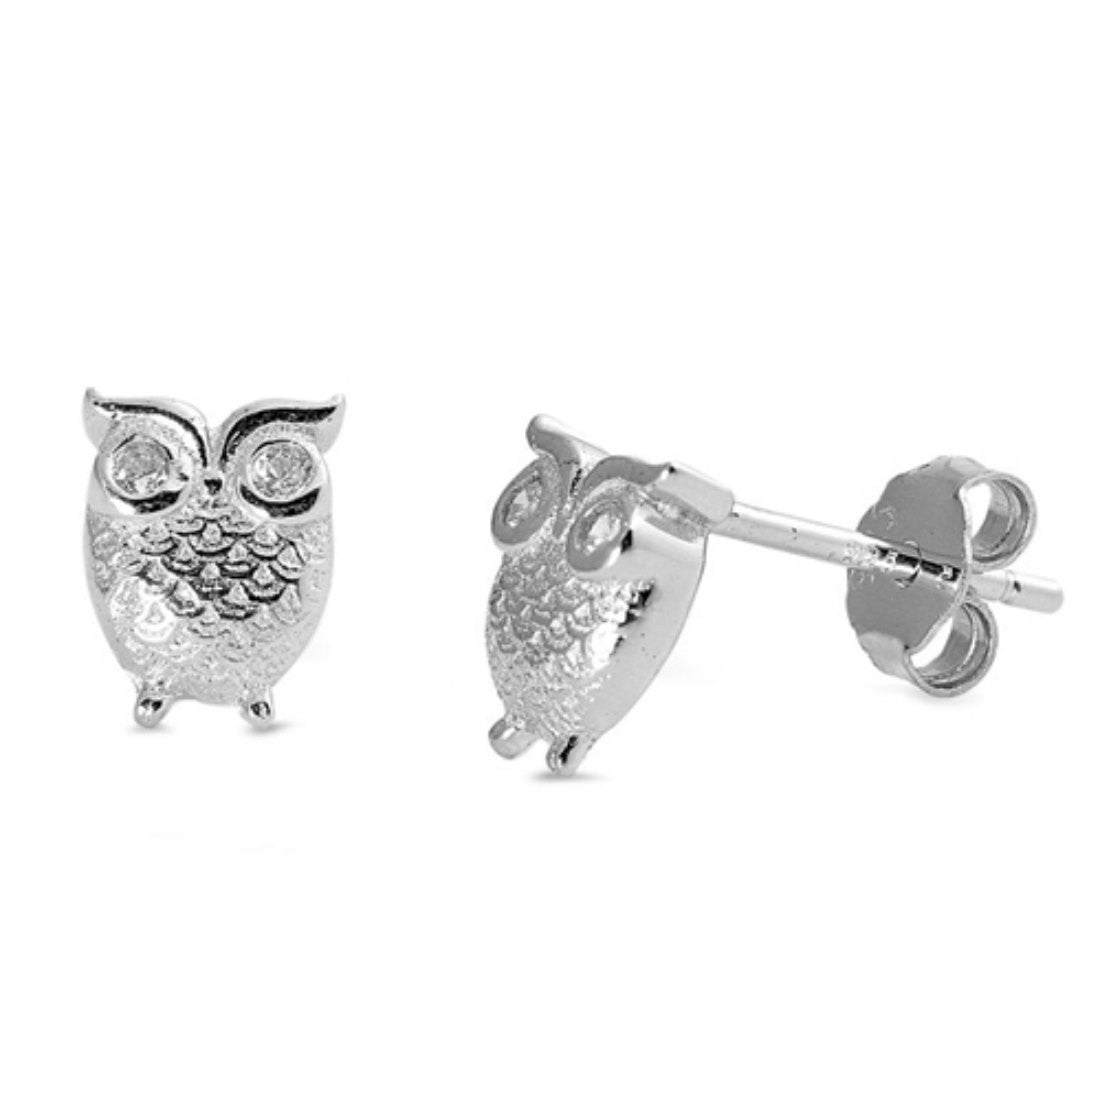 Tiny Owl Stud Earring Solid 925 Sterling Silver Round Cubic Zirconia Owl Shape Stud Earring Owl Jewelry Cute Gift - Blue Apple Jewelry